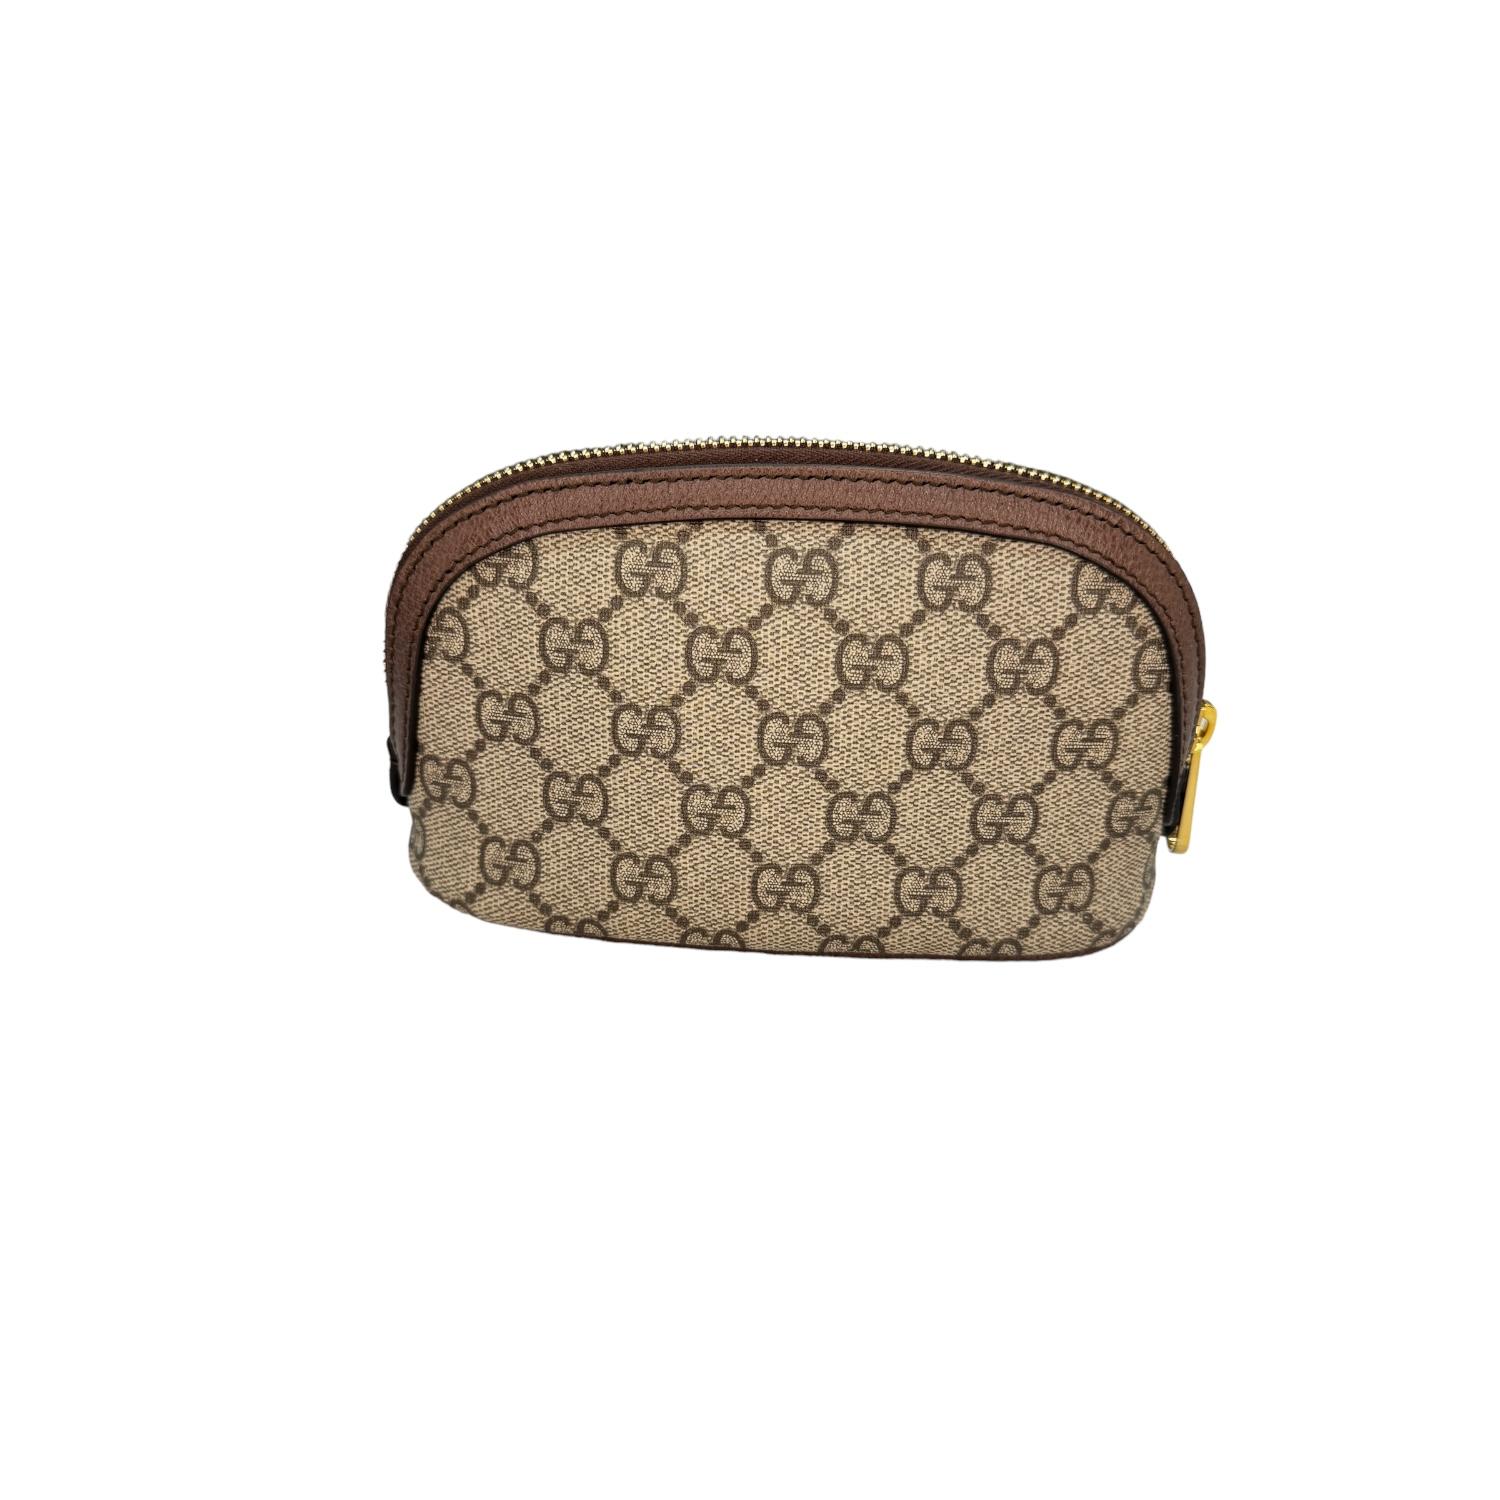 Gucci GG Supreme Monogram Textured Calfskin Web Medium Ophidia Cosmetic Case. This stylish cosmetic case is crafted of Gucci GG supreme monogram coated canvas, with brown leather trim. The bag features an interlocking GG logo and a green and red web